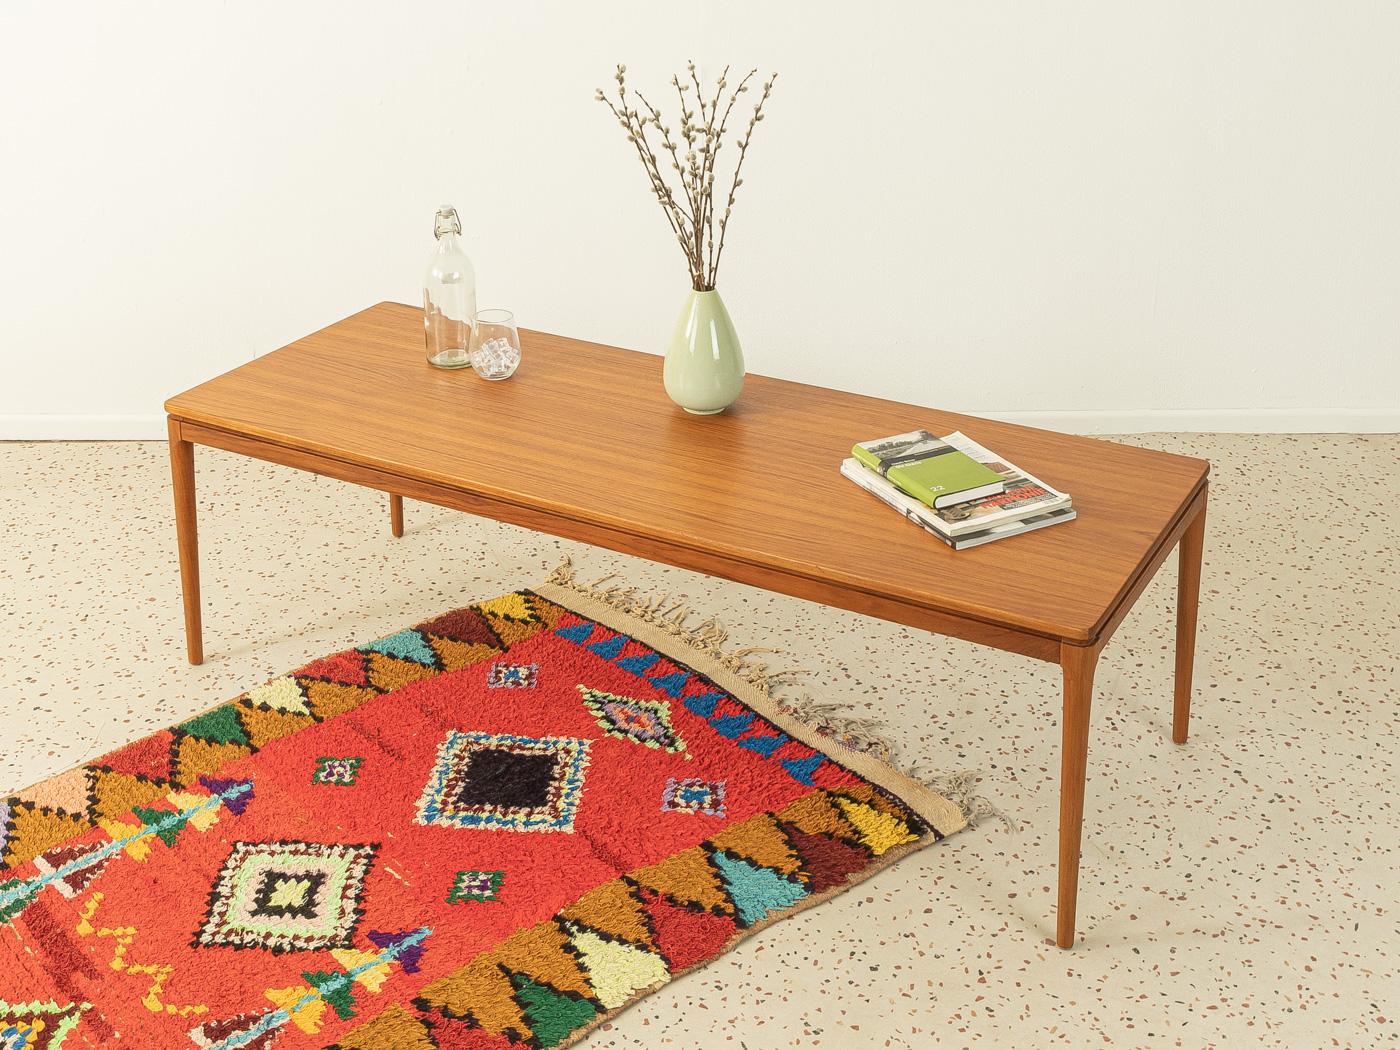 Rare coffee table from the 1960s by Anton Kildeberg Møbelfabrik. Solid frame in teak wood, a table top in teak veneer and a pull-out shelf with black Formica coating.

Quality Features:
- accomplished design: perfect proportions and visible